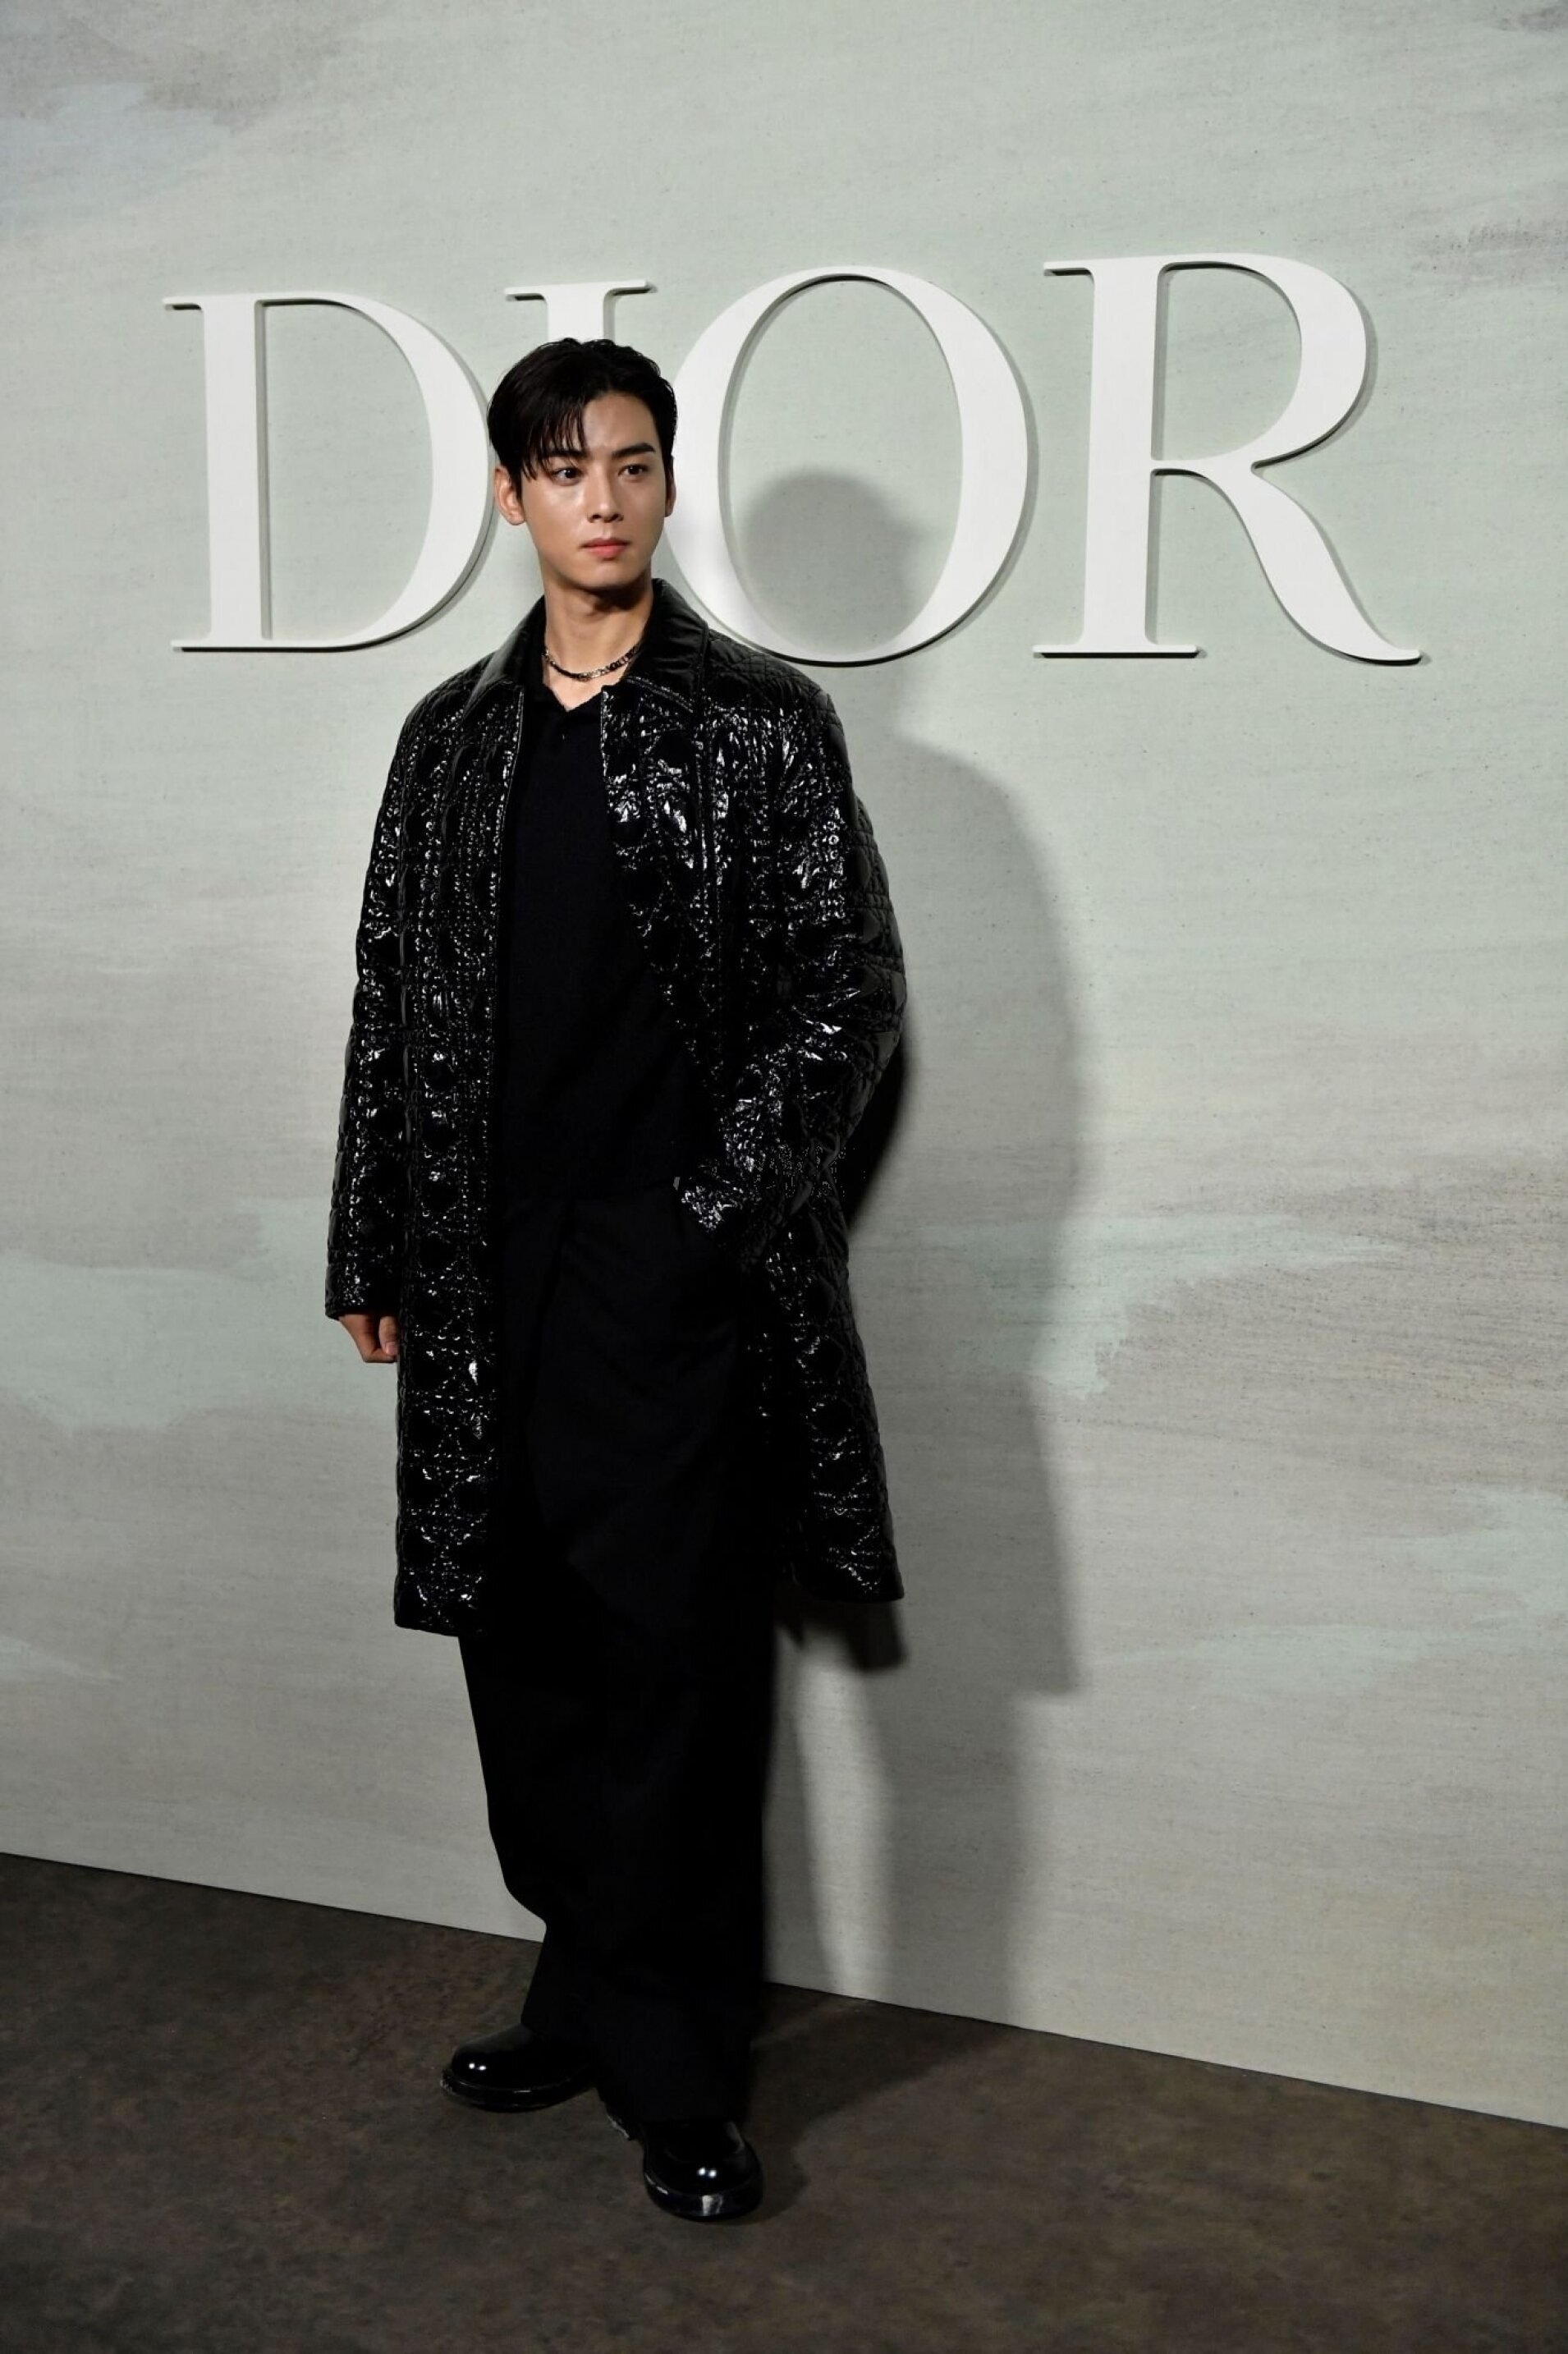 Fans Question Cha Eun Woo's Outfit At Dior Fashion Show